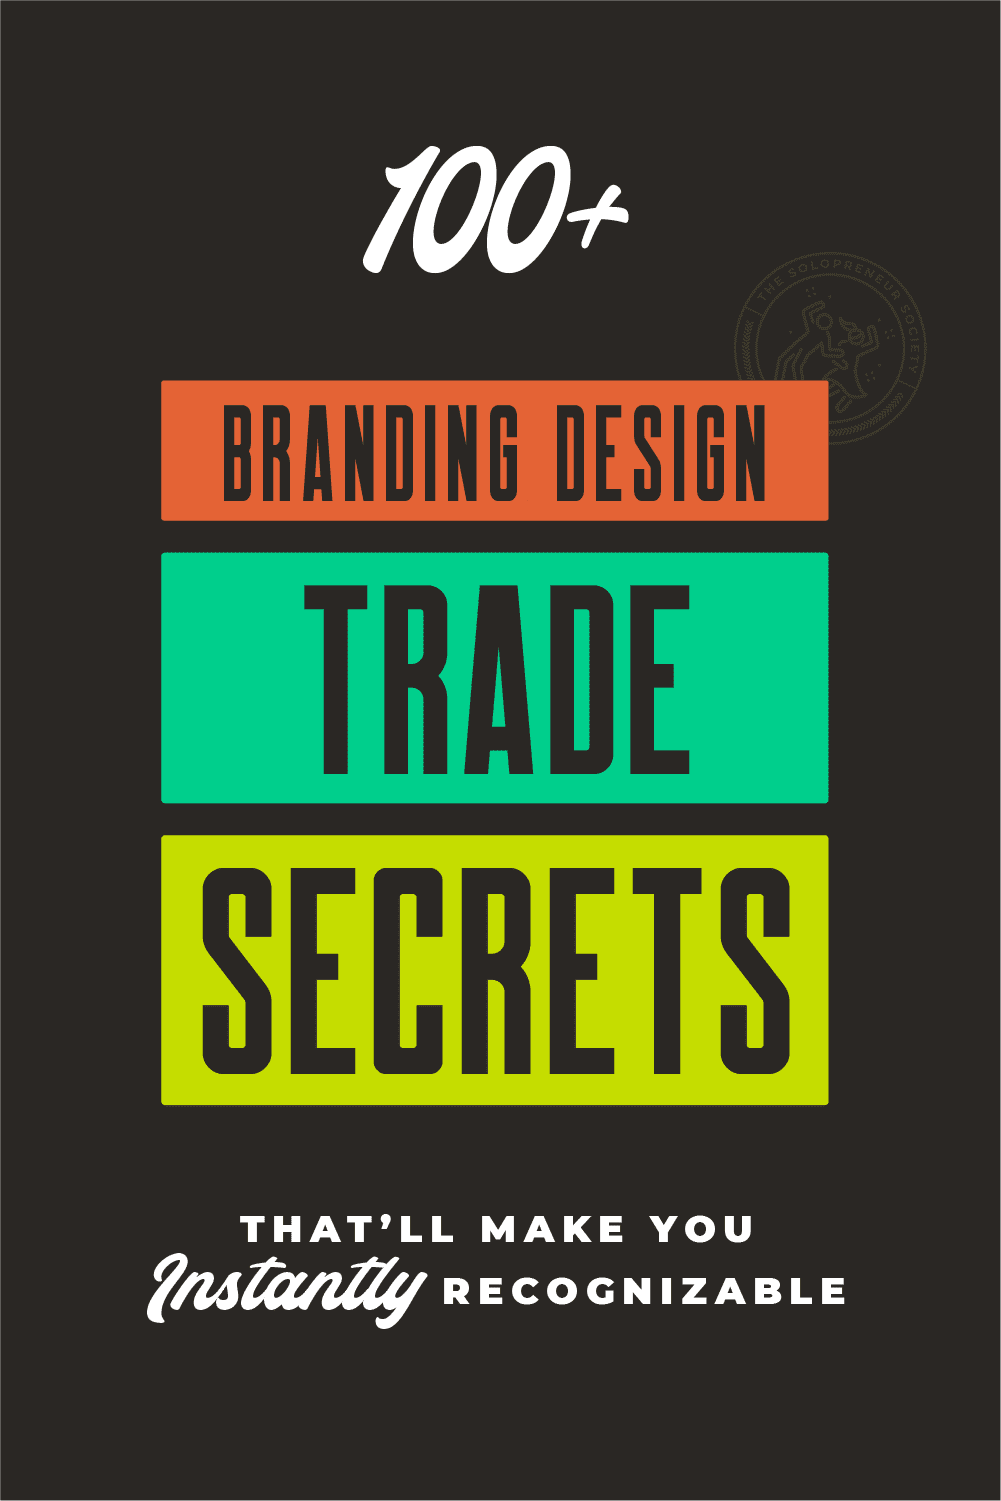 Brand Design: Styling Your Way To Brand Recognition